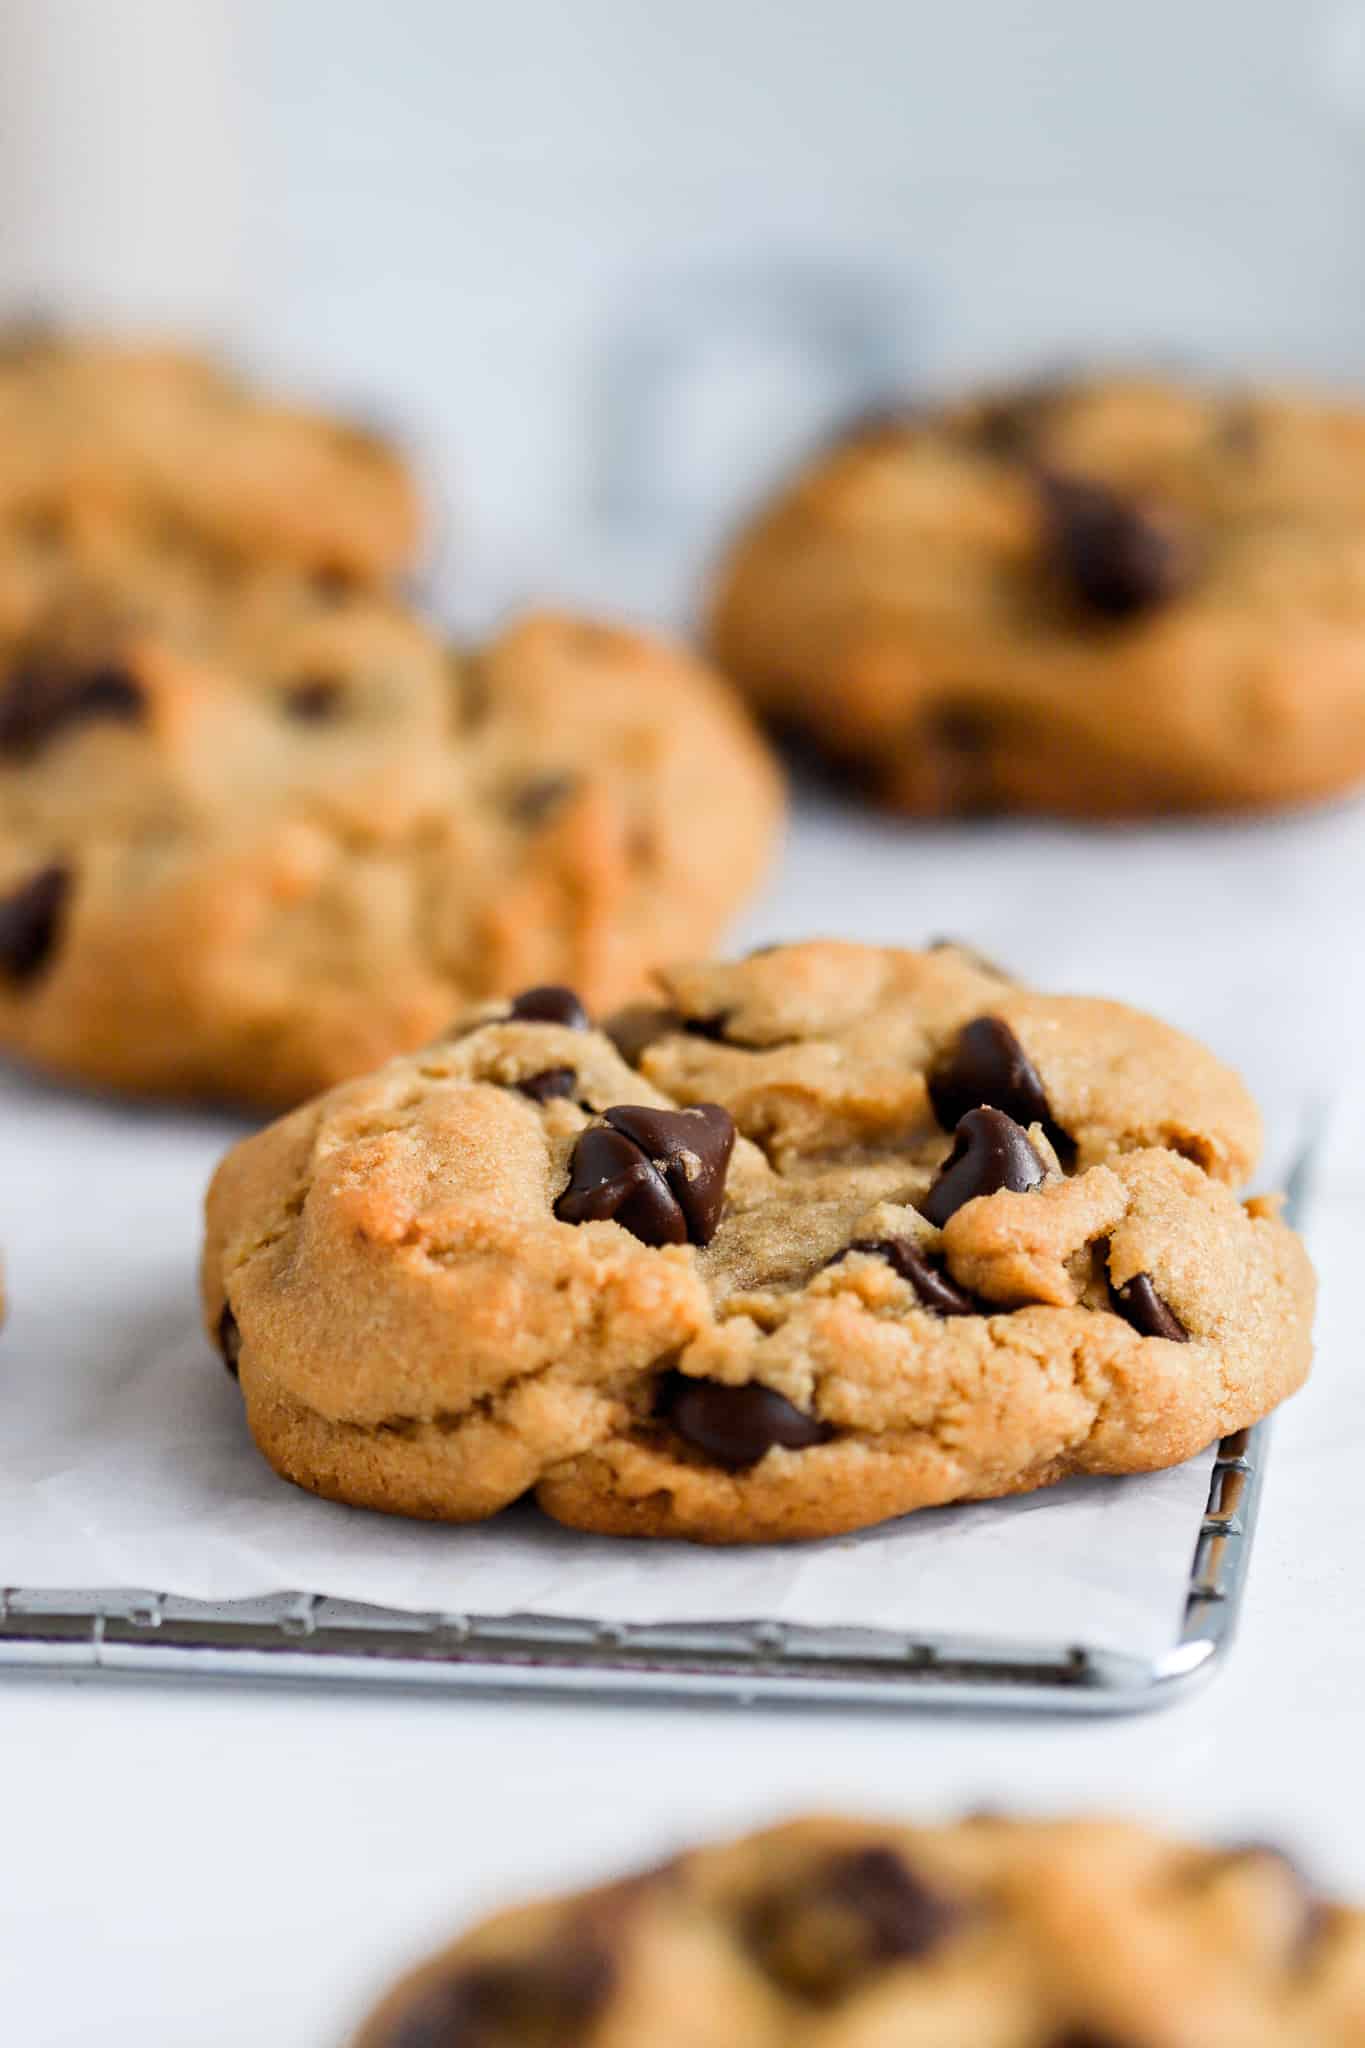 Ultimate Crisco Chocolate Chip Cookie Recipe - The Frosted Kitchen